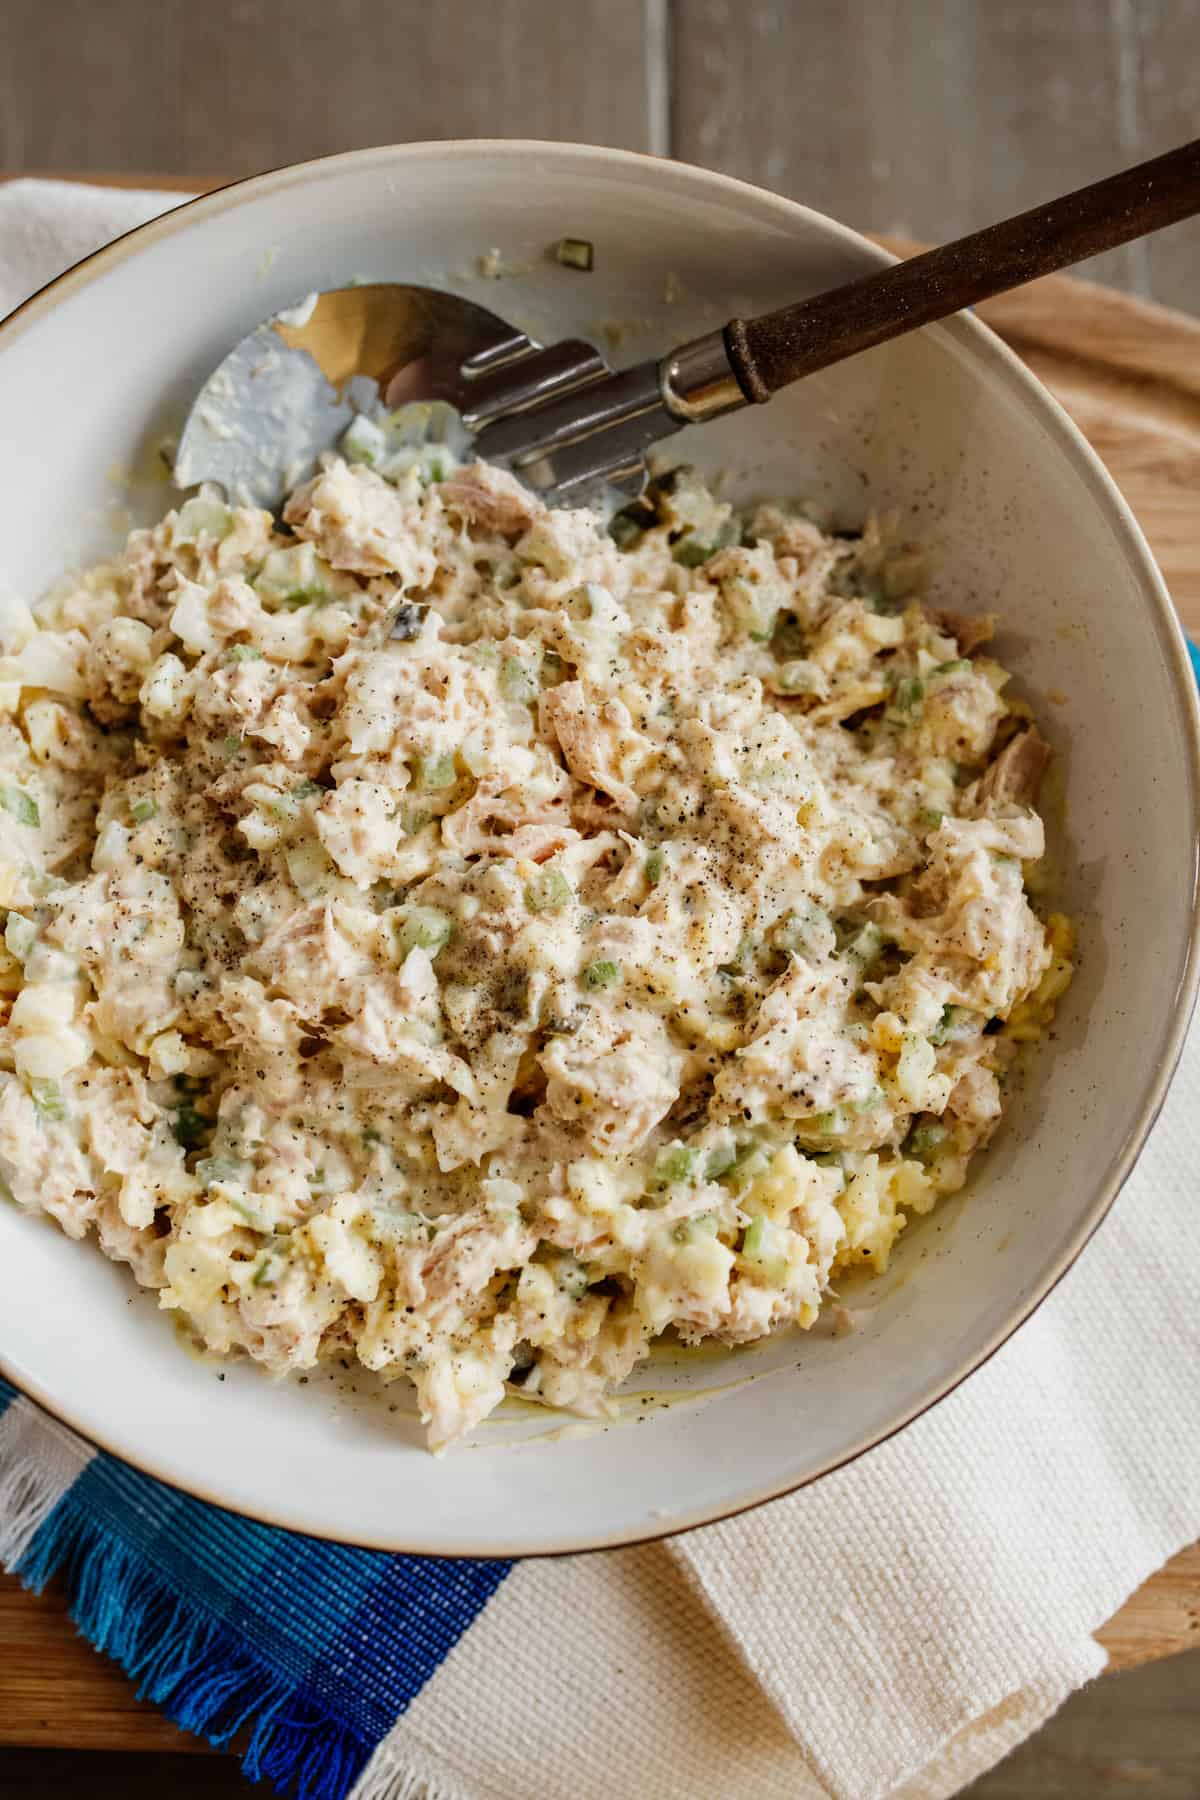 tuna salad made with eggs in a serving bowl with a wooden handled serving spoon on a blue and white woven cloth.